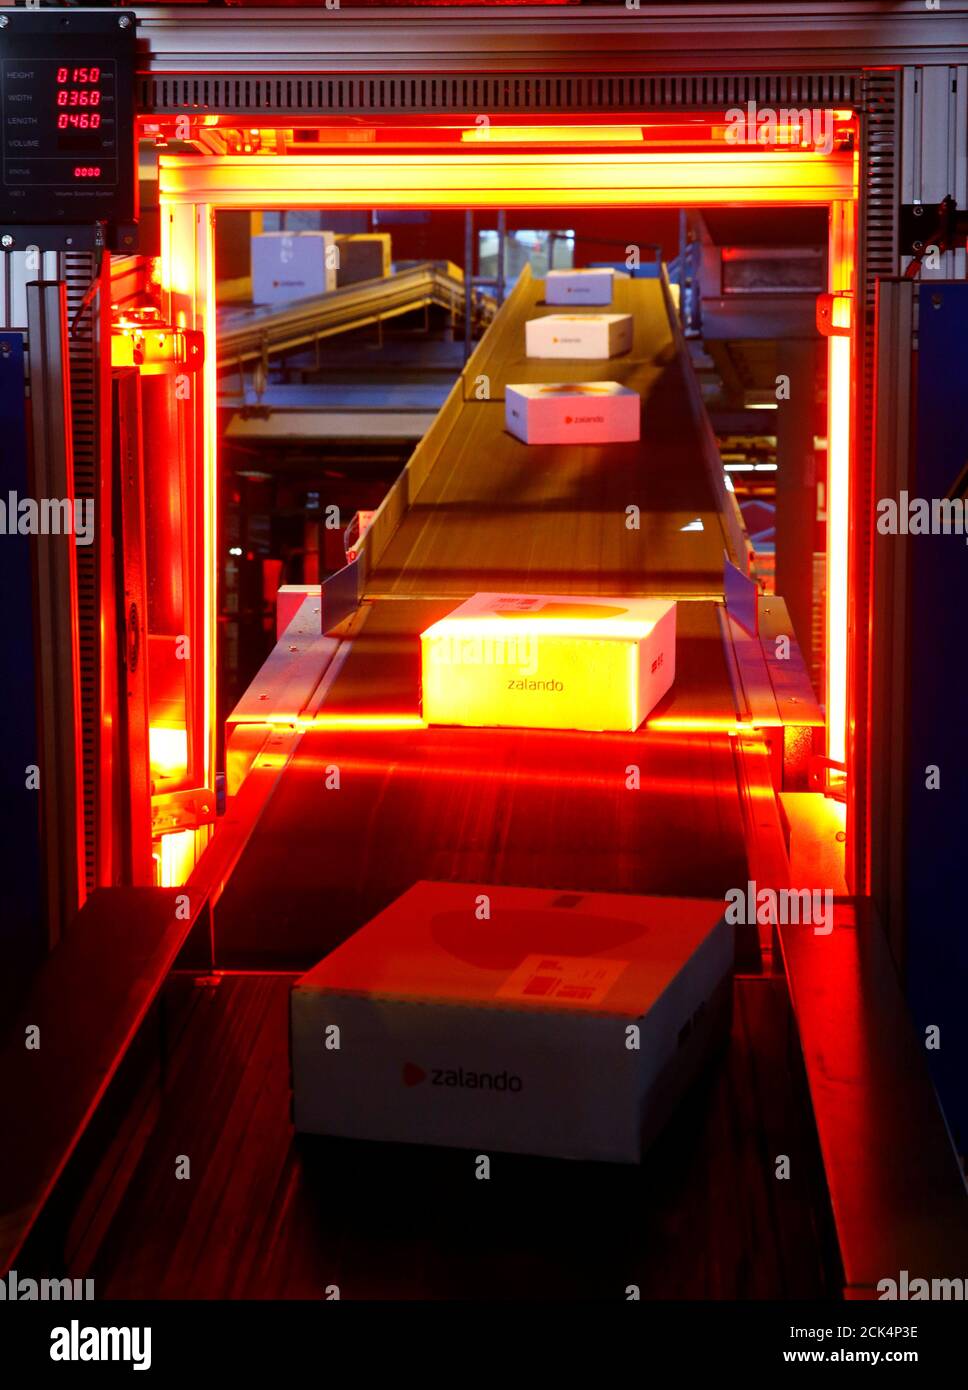 Parcels of online mail order company Zalando are transported on a conveyor  through an automatic coding device at the parcel distribution center of  Schweizerische Post (Swiss Post) in Frauenfeld, Switzerland, June 3,